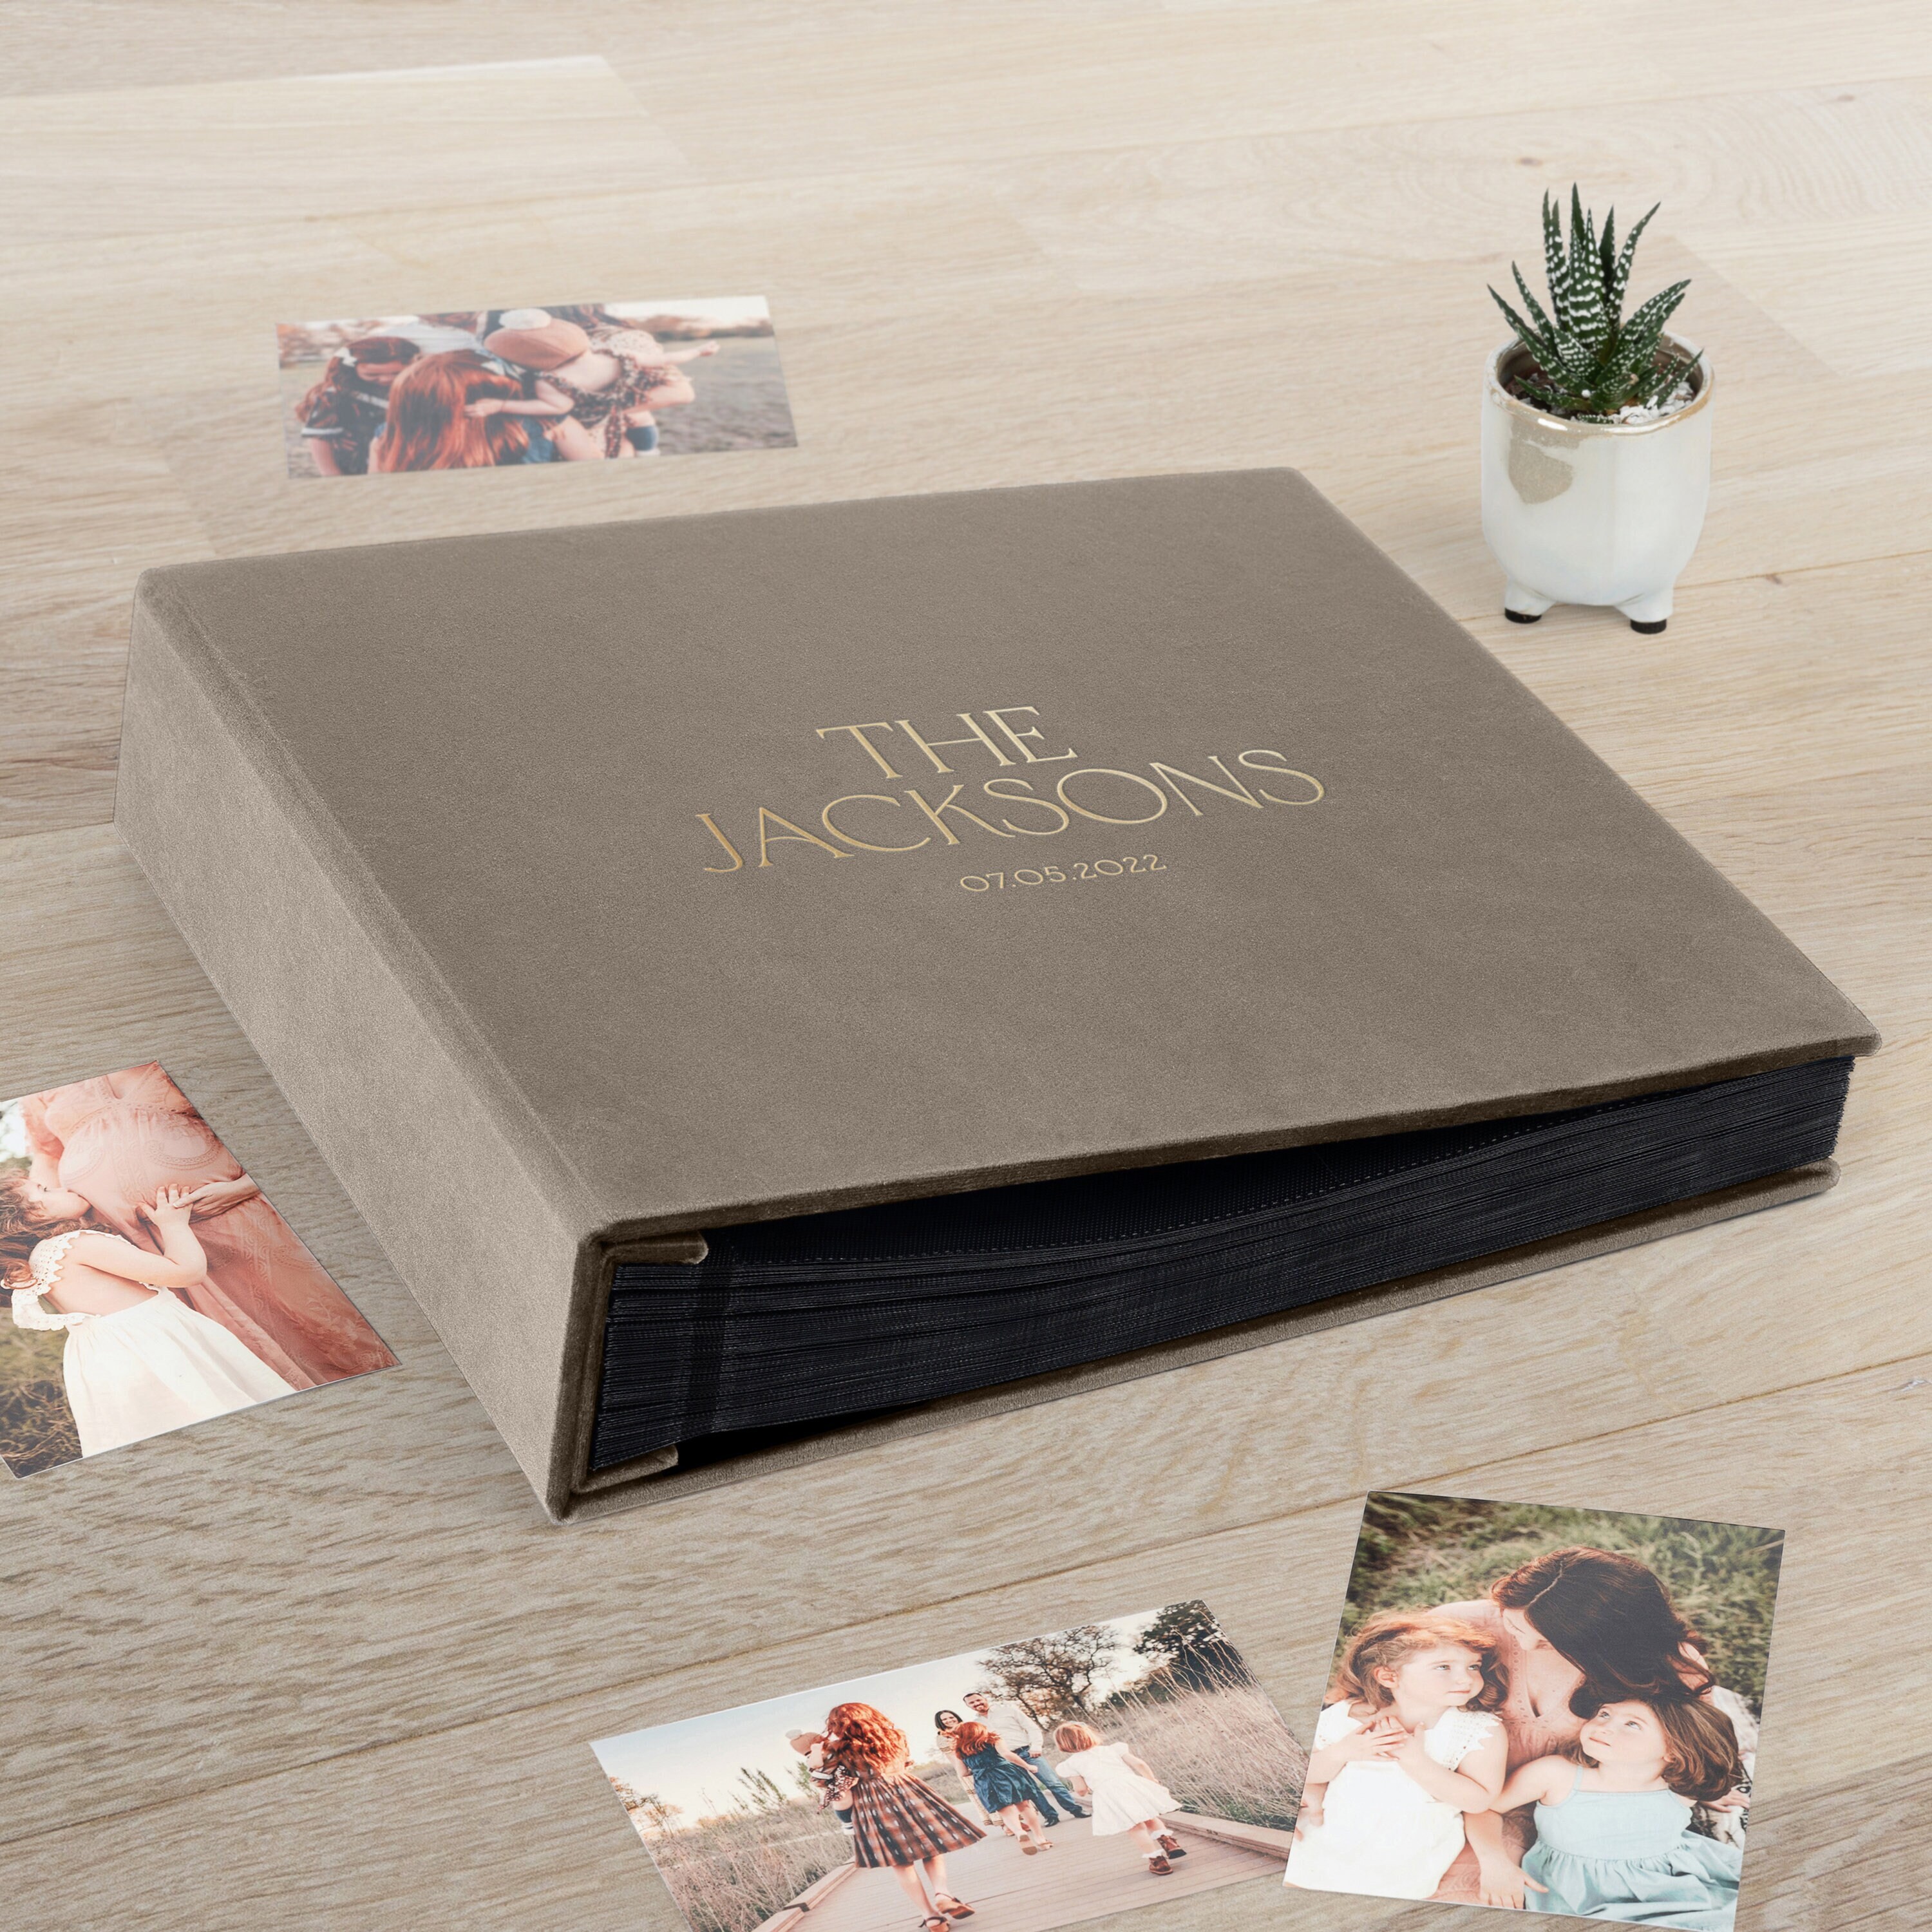 Extra Large Wedding Slip-in Photo Album for up to 1200 4x6 Photos  Personalized Velvet Scrapbook Album With Portrait and Landscape Sleeves 